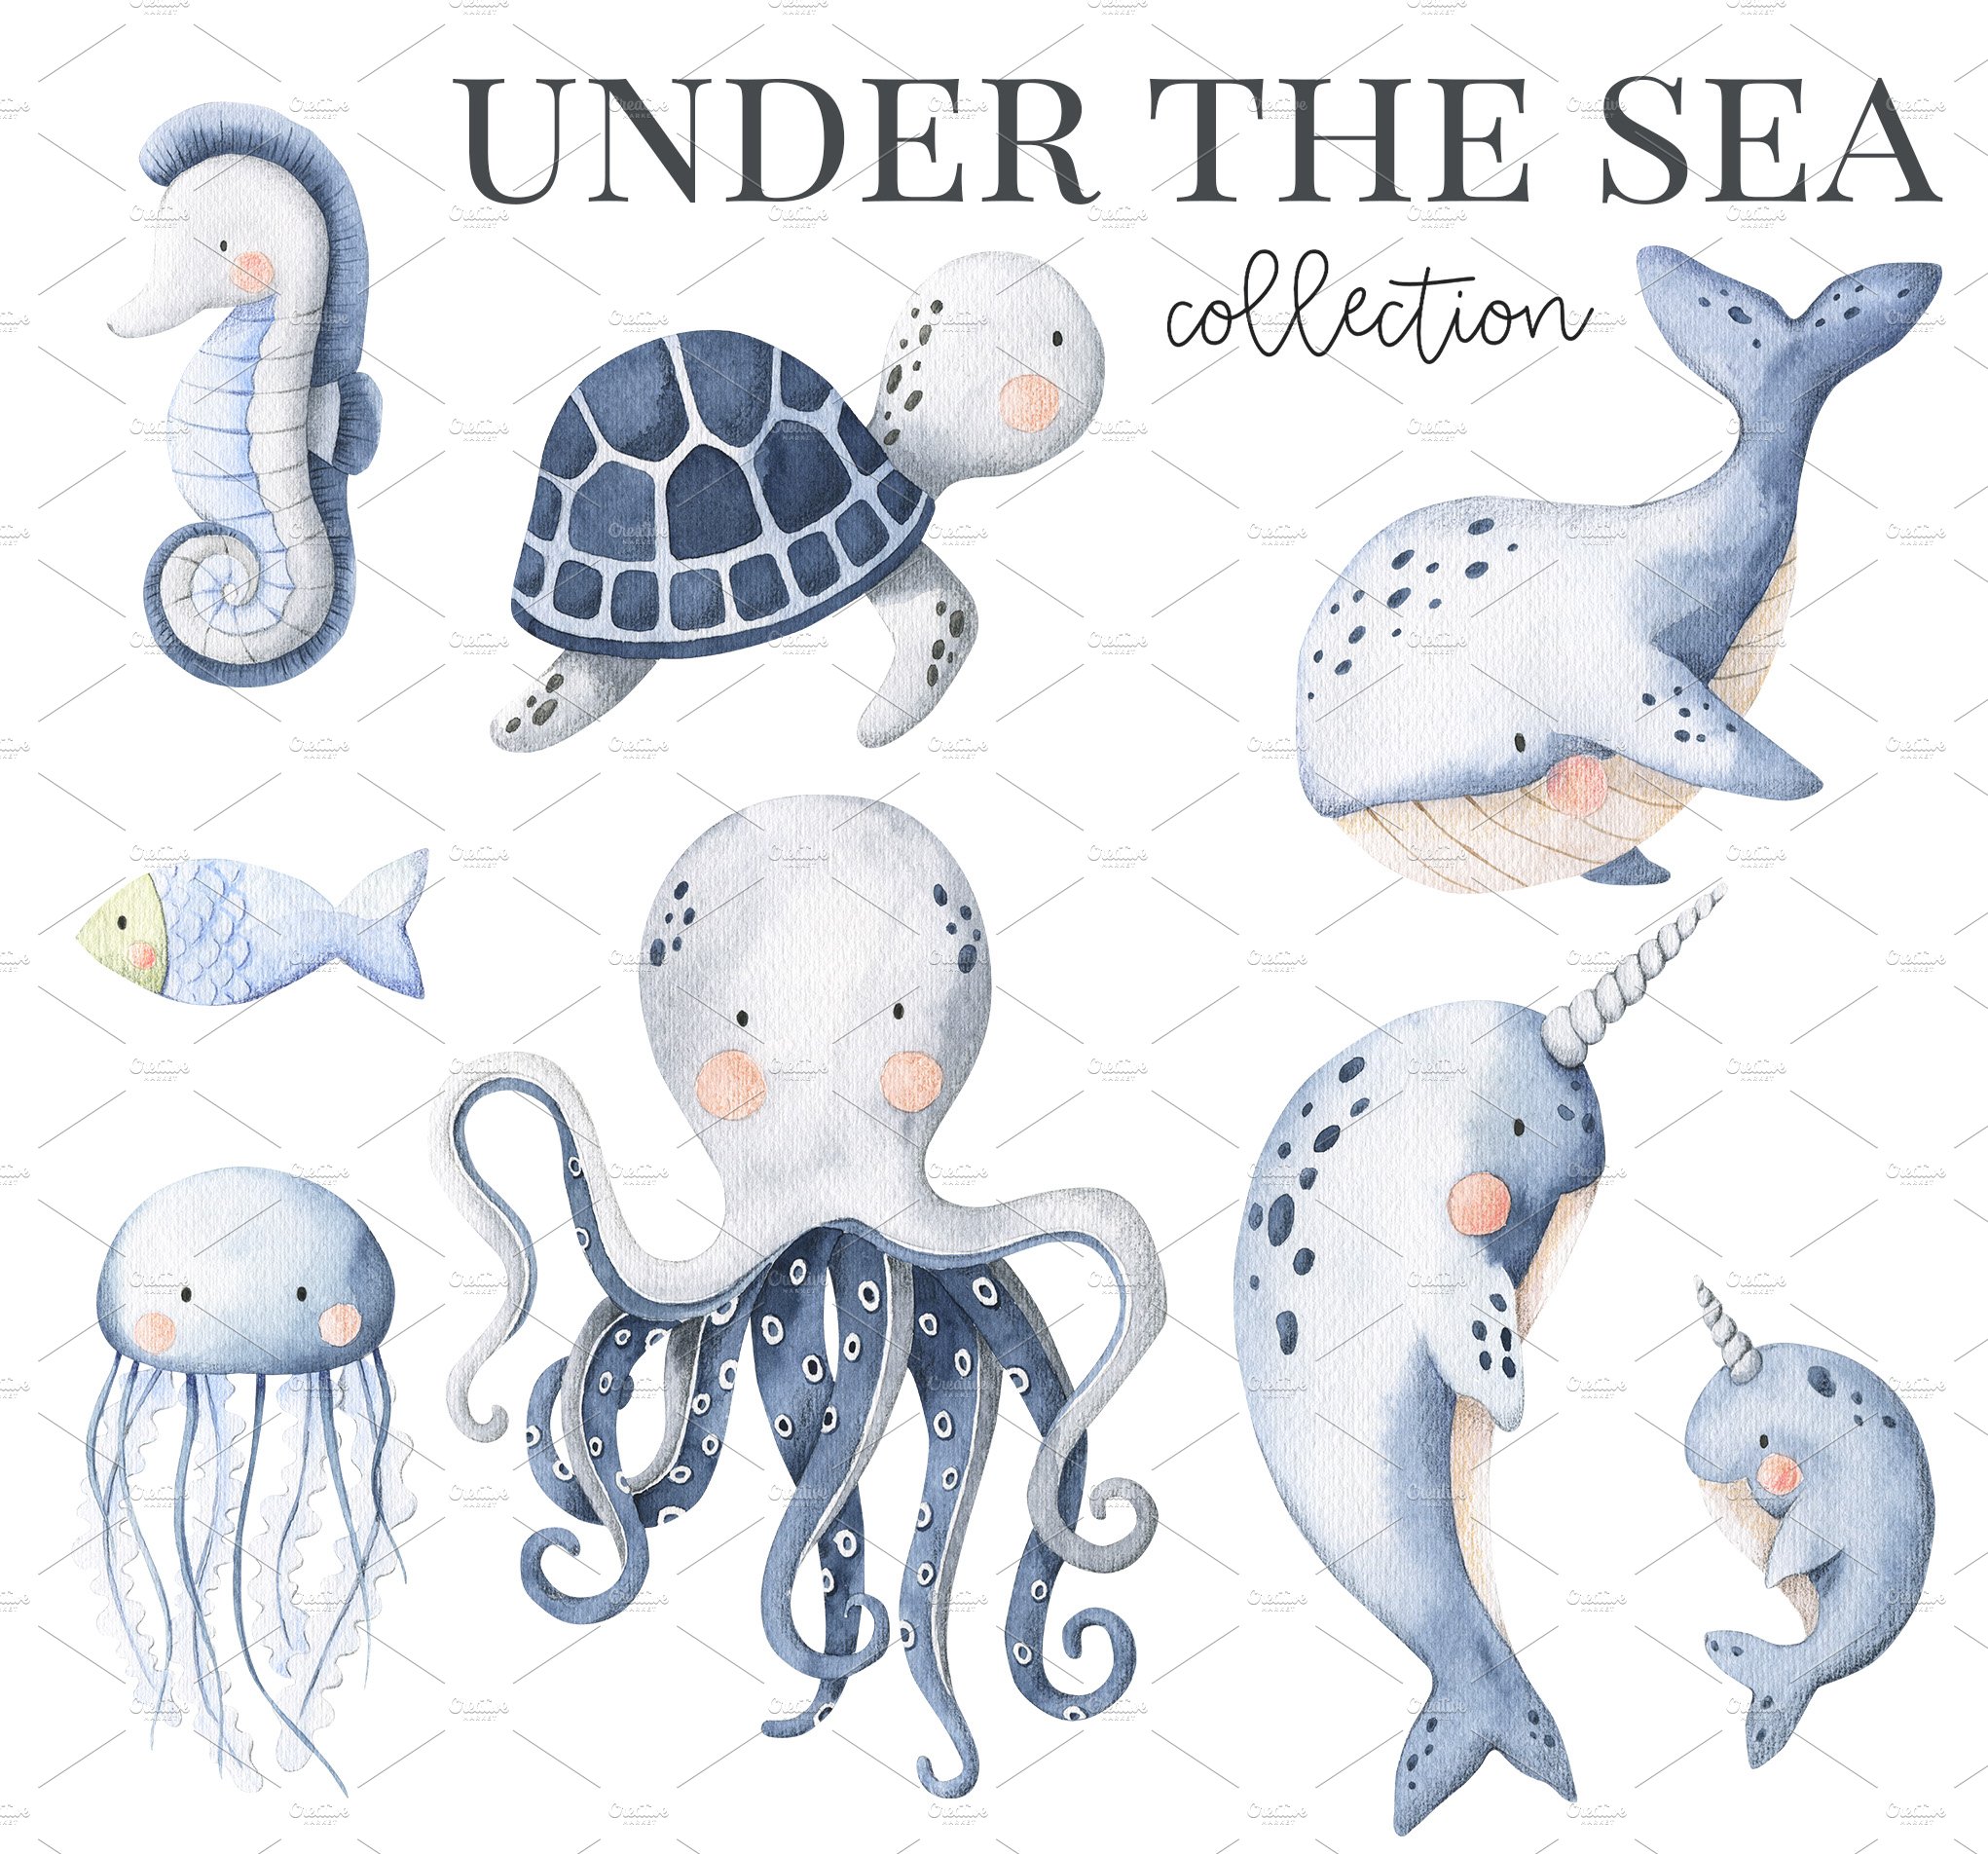 Under the sea habitants in a watercolor style.